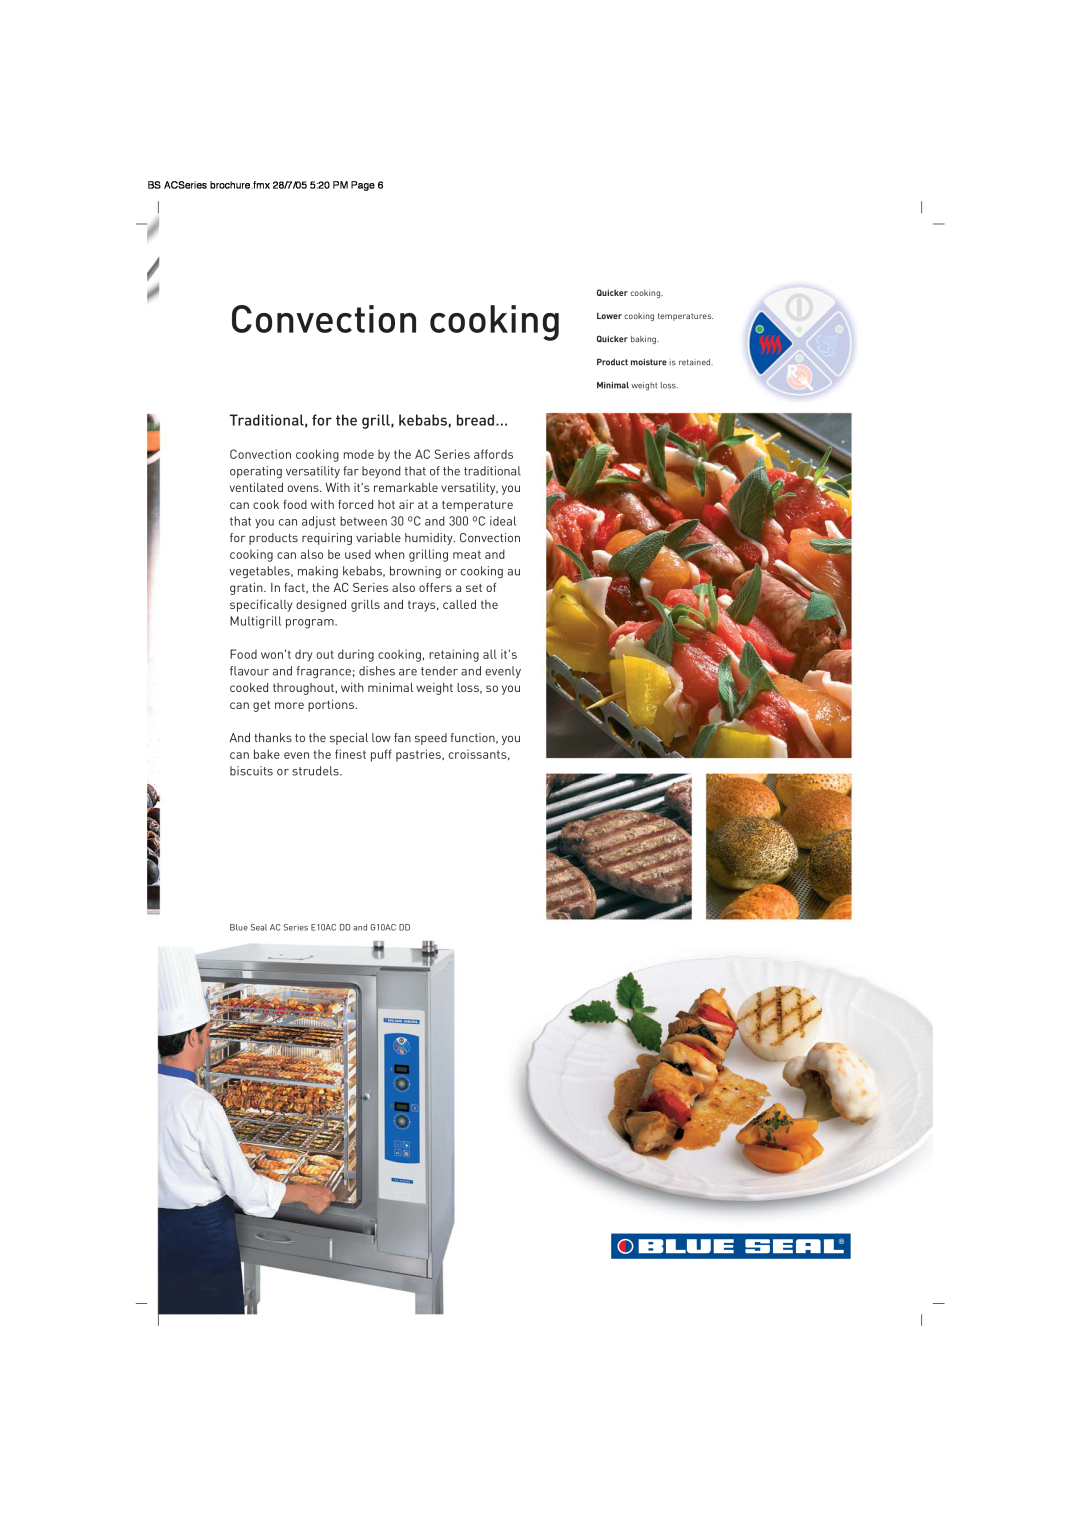 Moffat AC Series brochure Convection cooking, Traditional, for the grill, kebabs, bread 